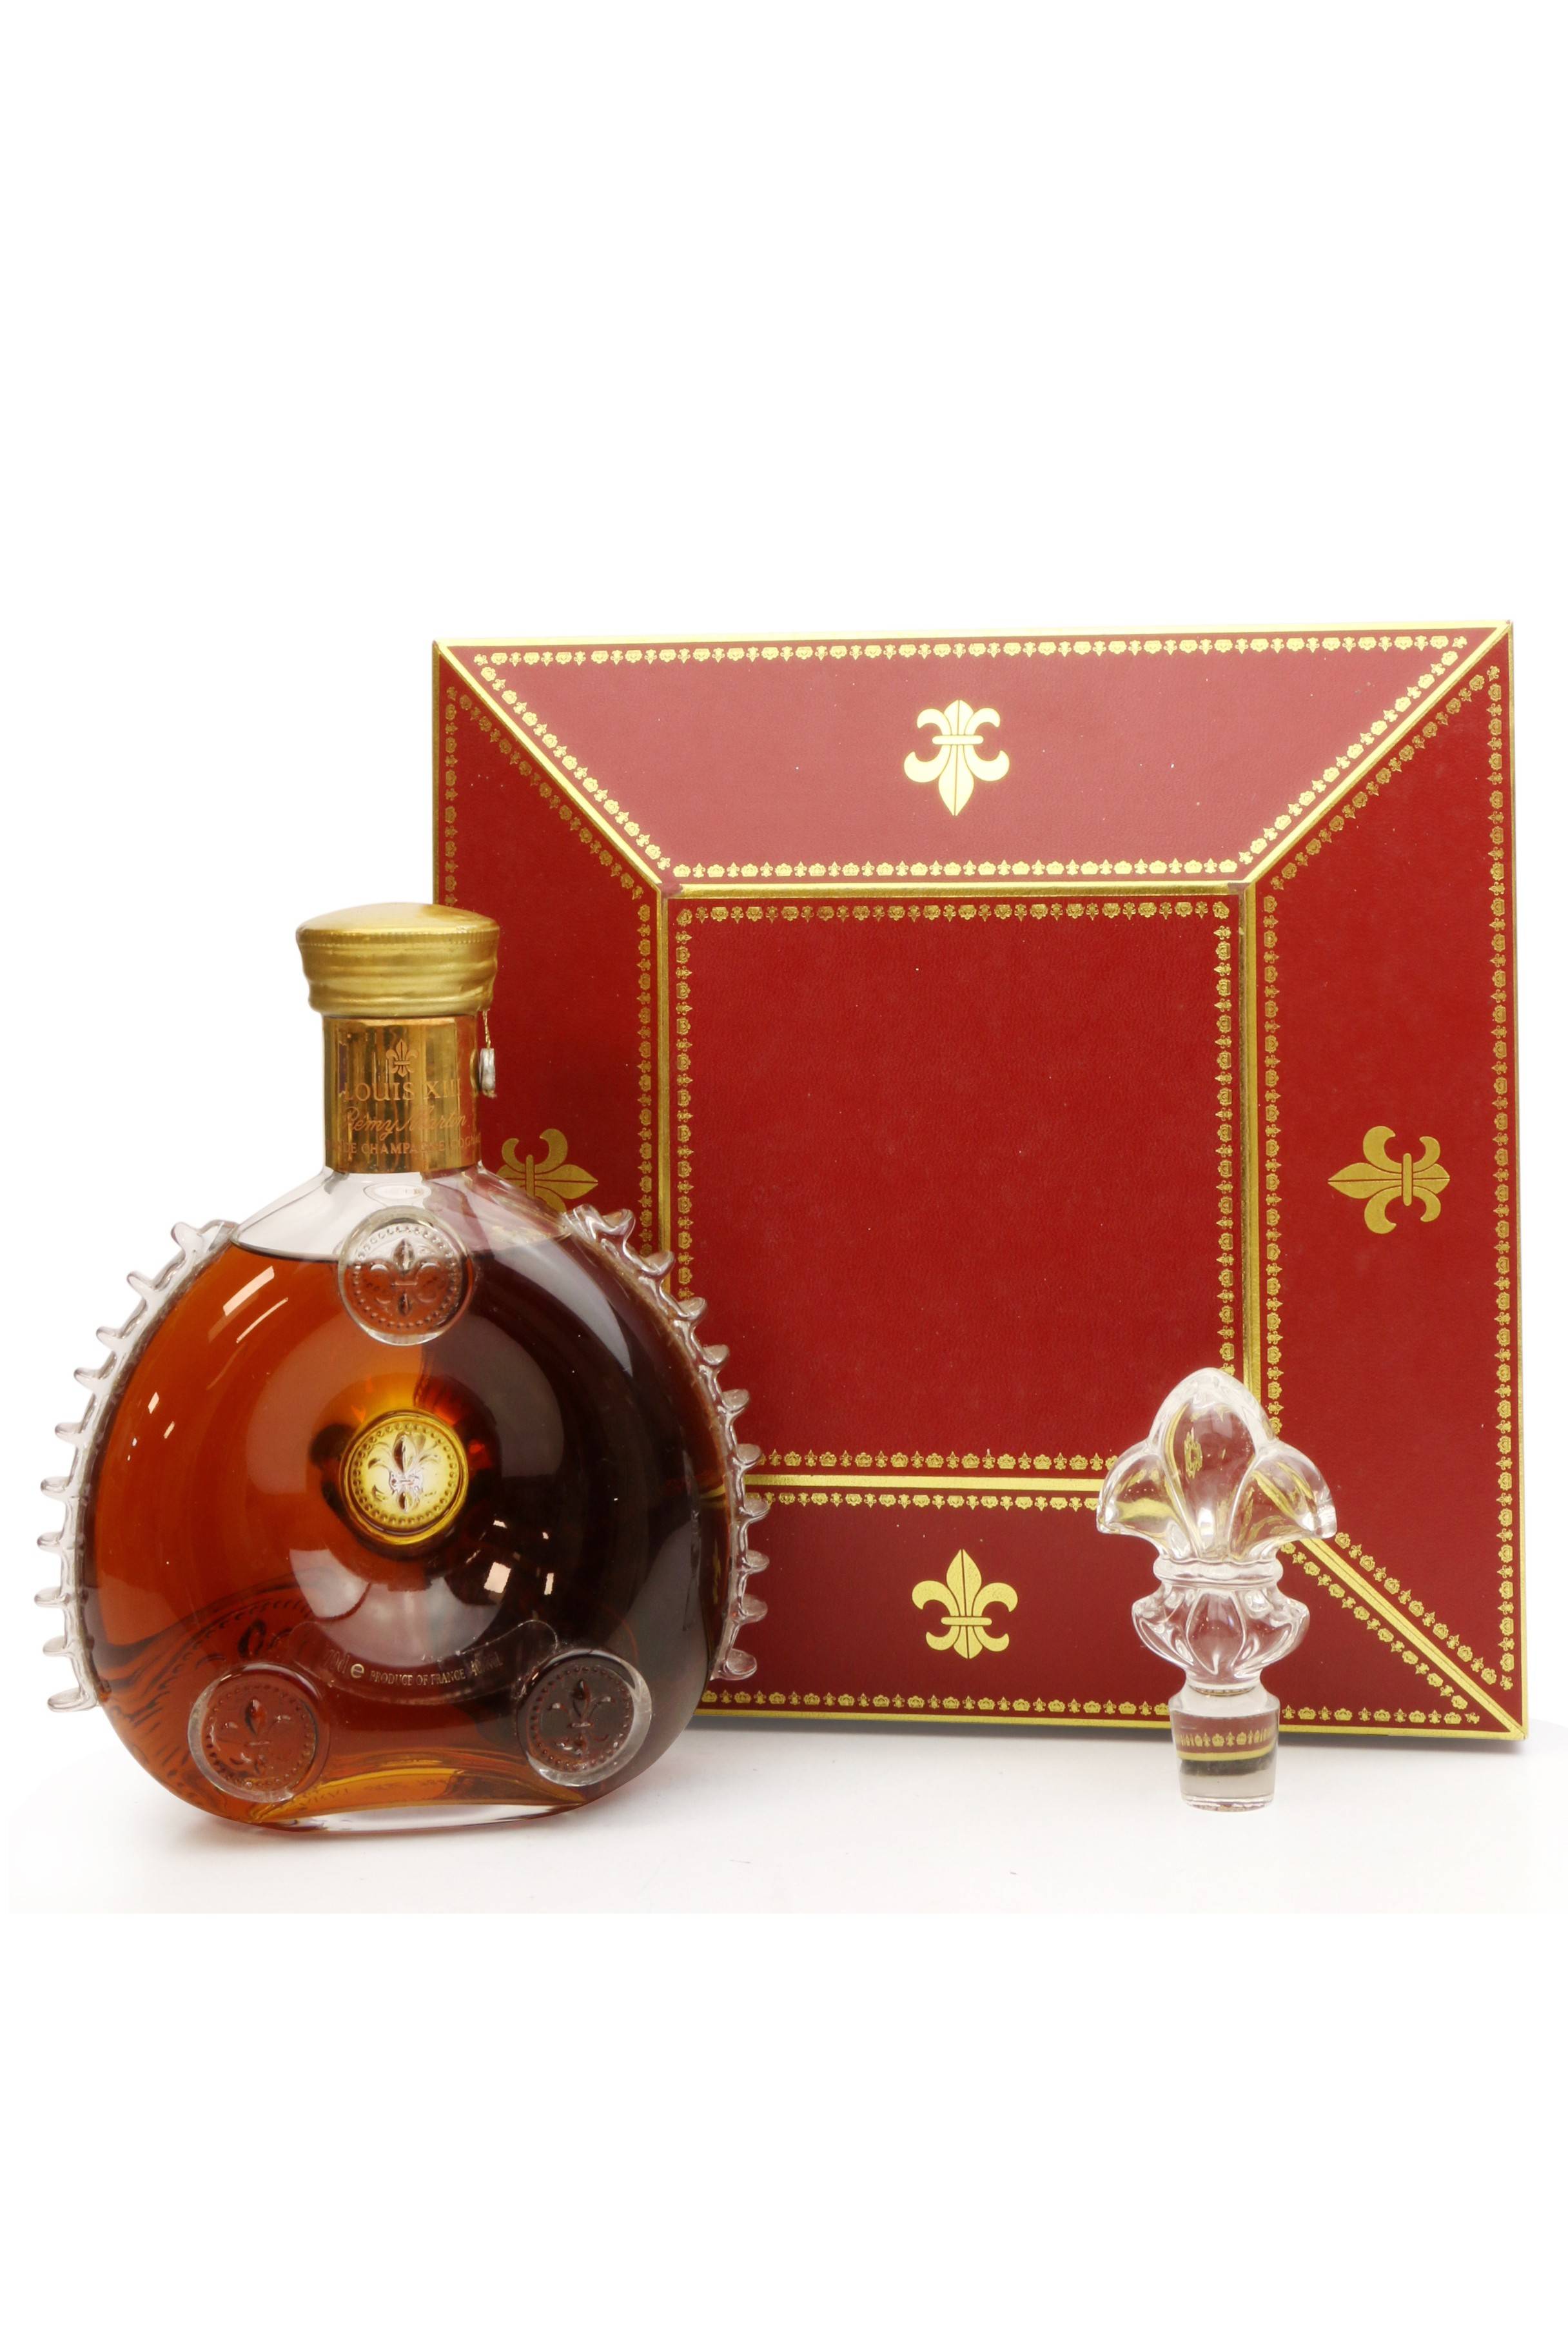 Sold at Auction: REMY MARTIN LOUIS XIII COGNAC BACCARAT CRYSTAL